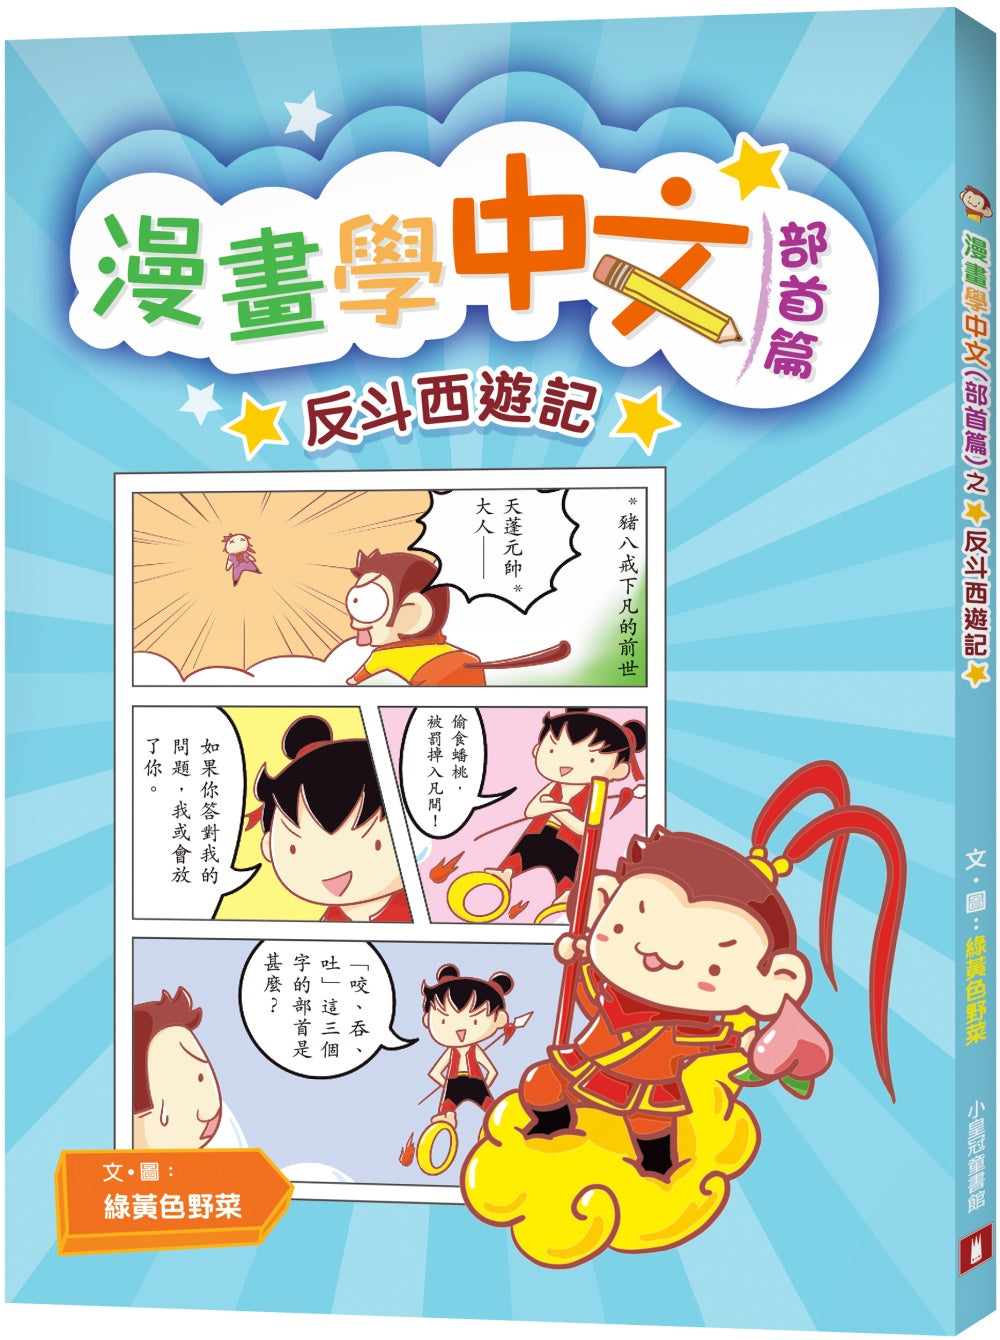 Radical Fun: Learn Chinese Characters with Journey to the West Comics • 漫畫學中文（部首篇）之反斗西遊記